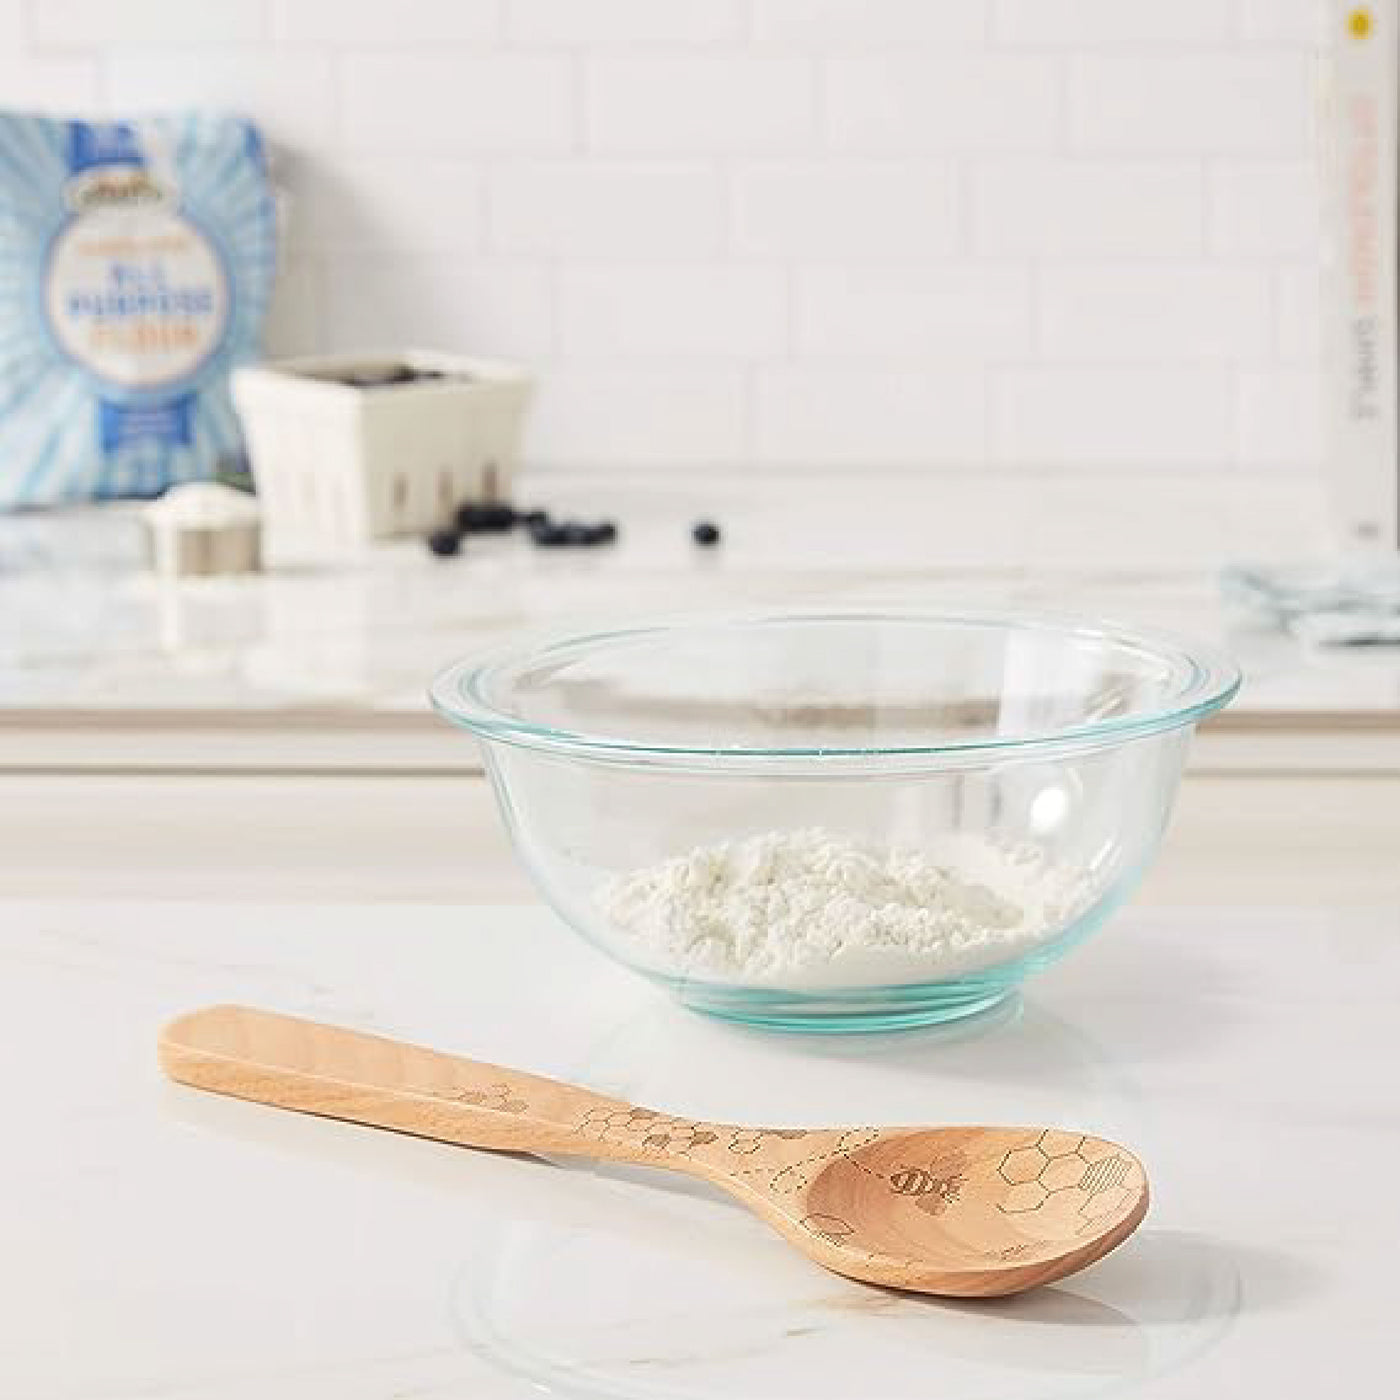 BAKERS MEASURING & MIXING SPOON